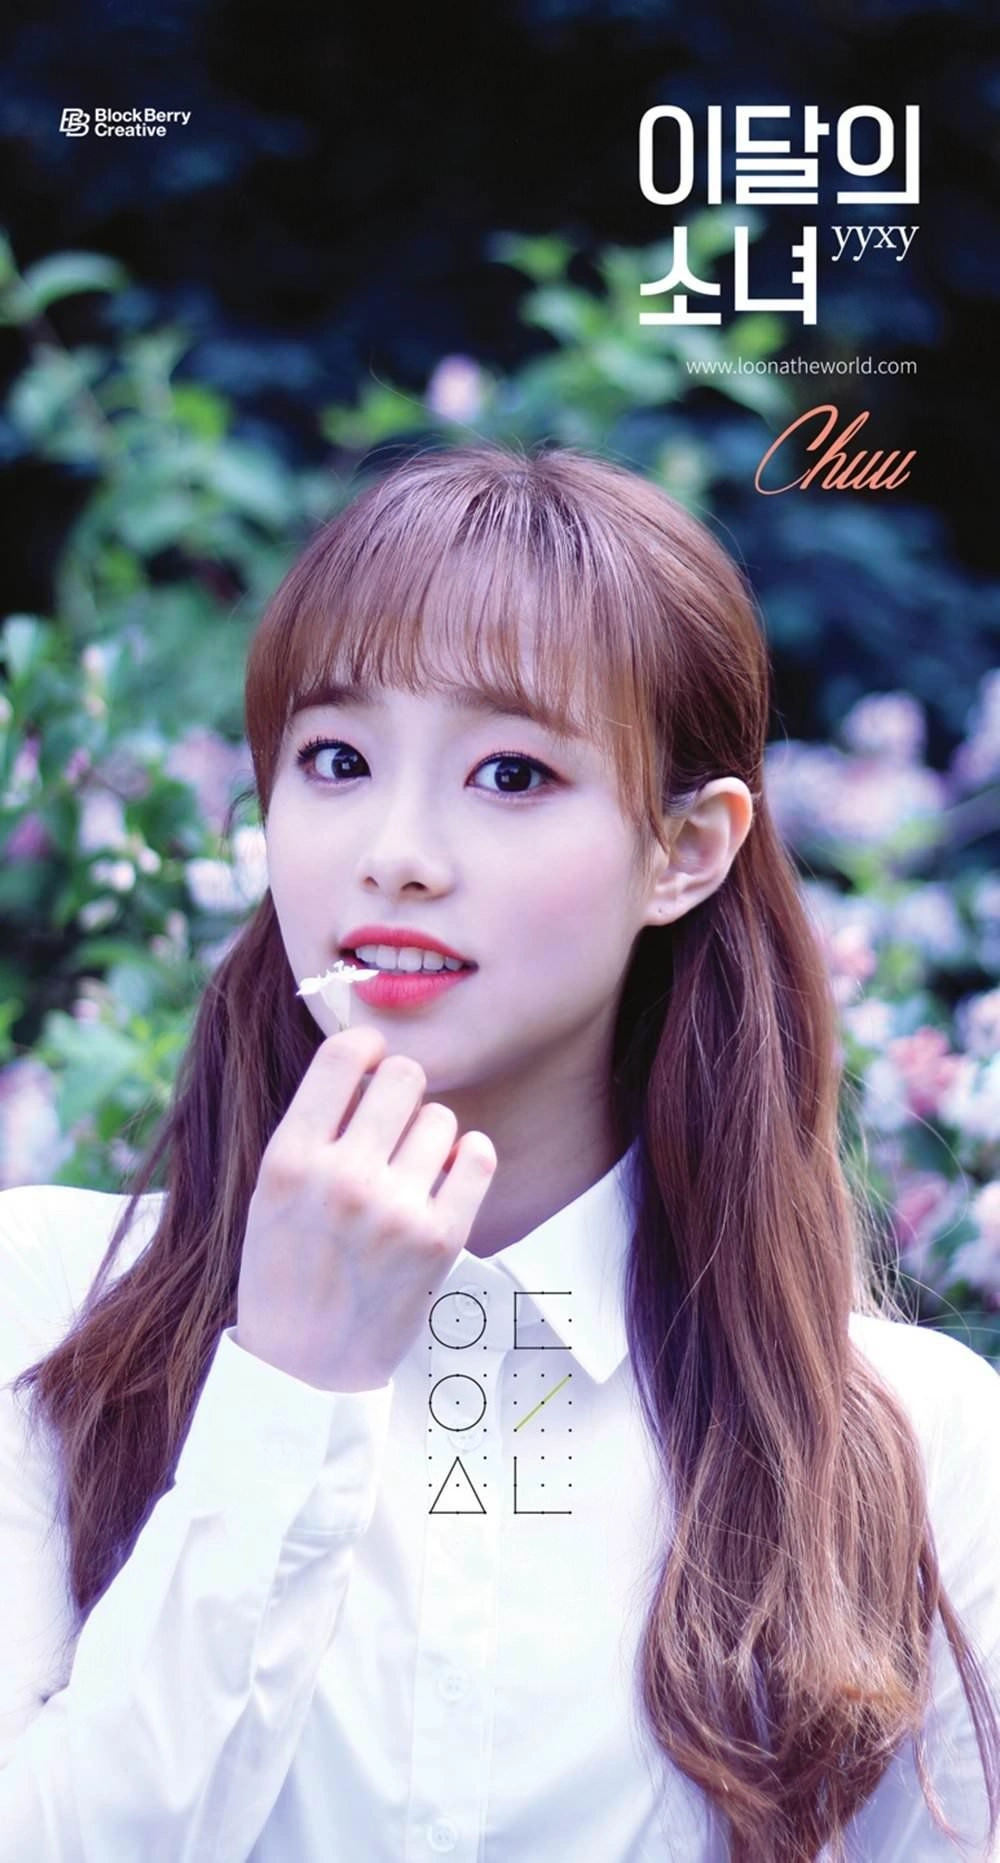 Loona yyxy Beauty & the Beat Chuu Concept Teaser Picture Image Photo Kpop K-Concept 1